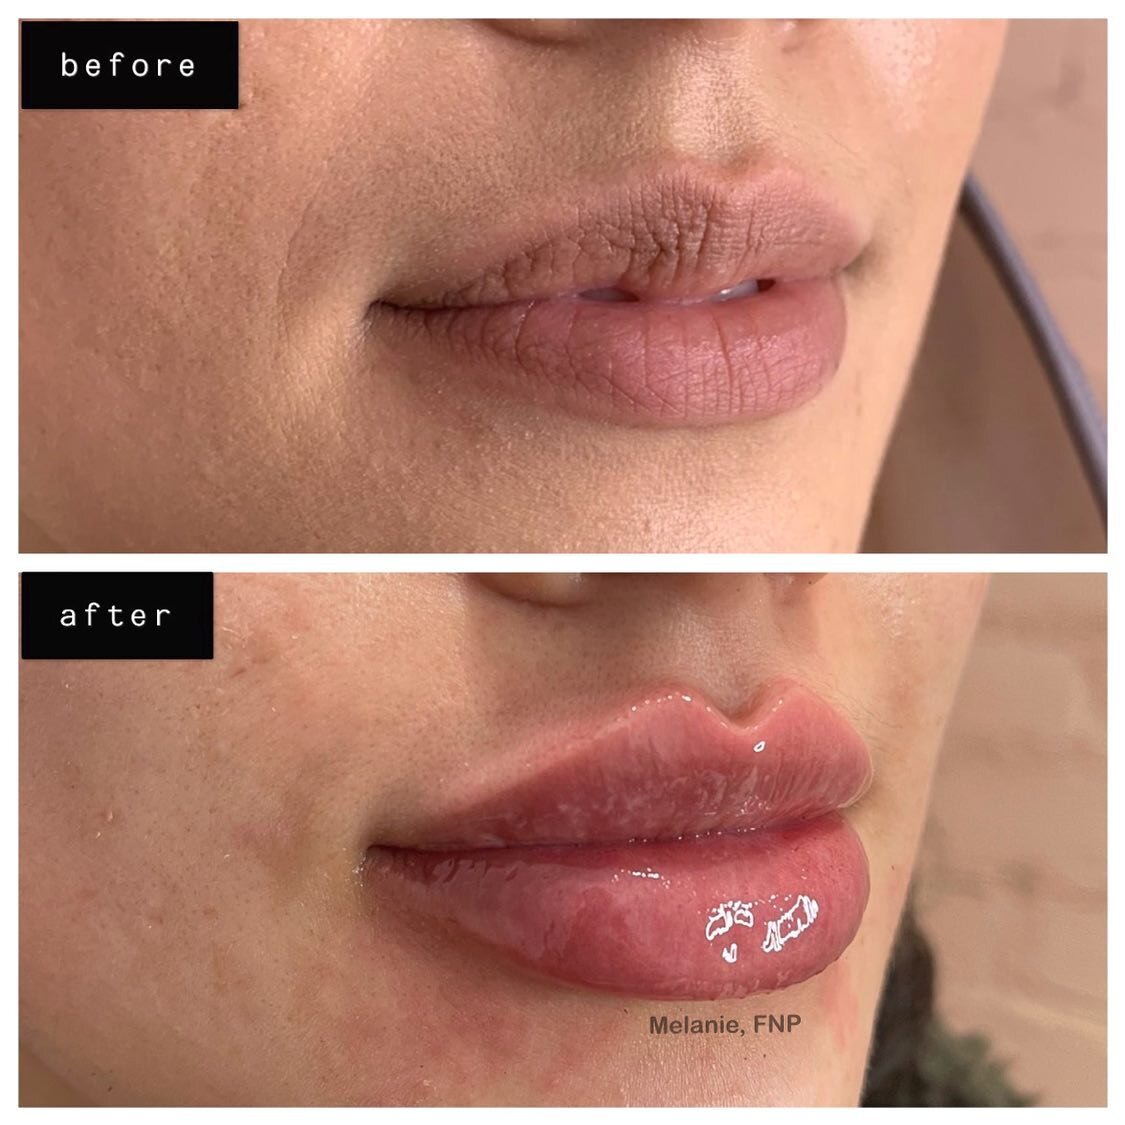 2 SYRINGES TO CREATE THESE SAUCEY RUSSIAN LIPS (no filler above or below the lip line)💉👄
#russianlips#Juvederm#Restylane#Voluma#Botox#Dysport#Kybella#aesthetics#dermalfiller#lipaugmentation#noseaugmentation#chinaugmentation#cheekenhancement#underey